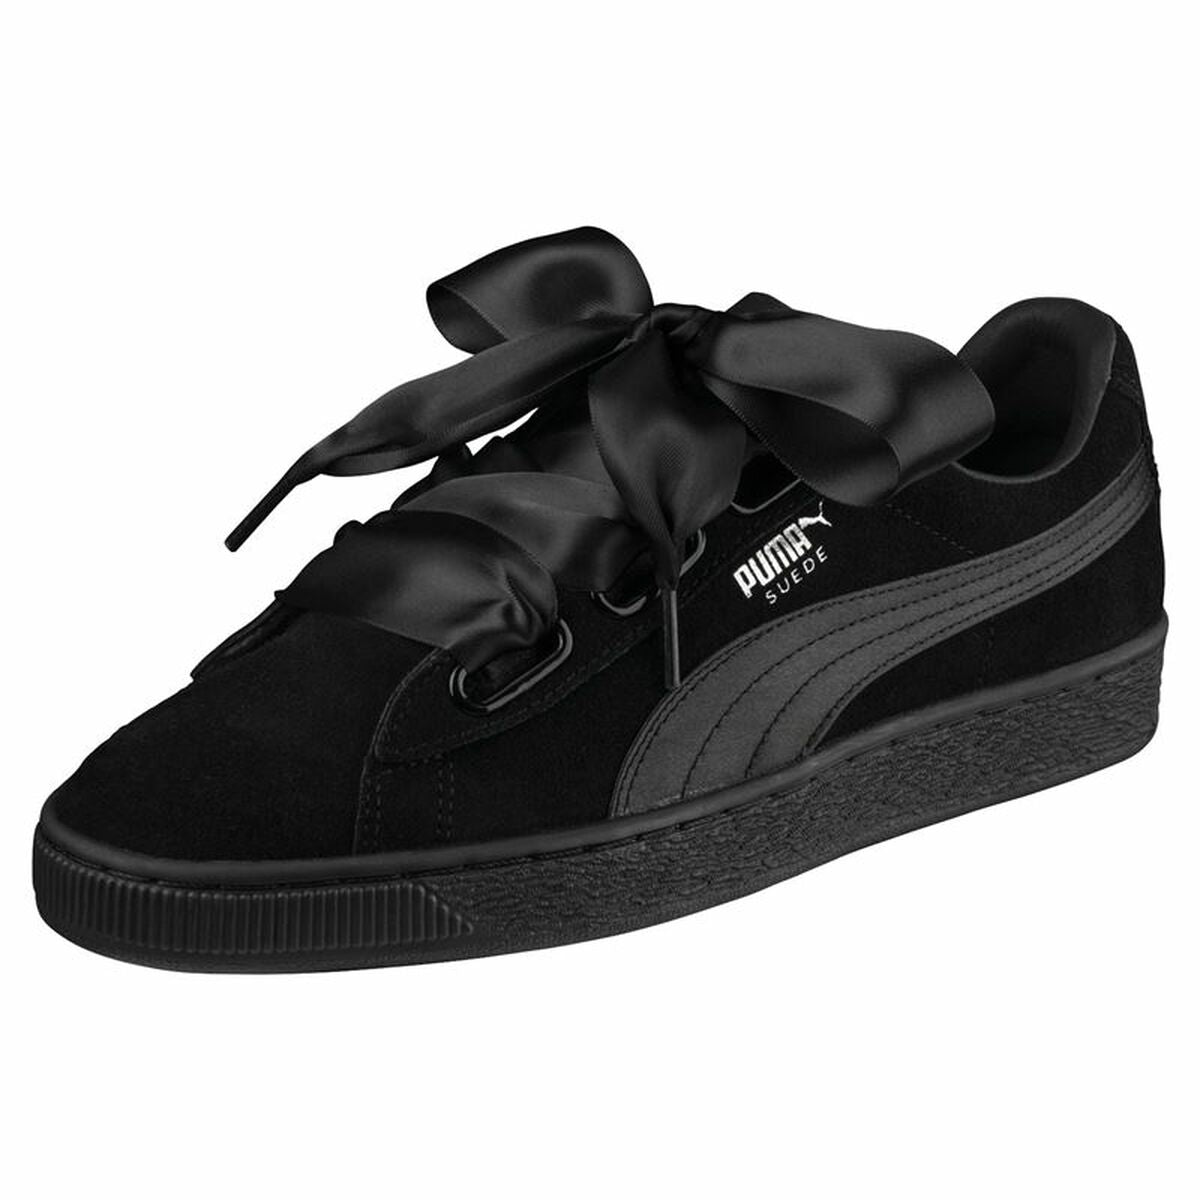 Women's casual trainers Puma Suede Heart Ep Black